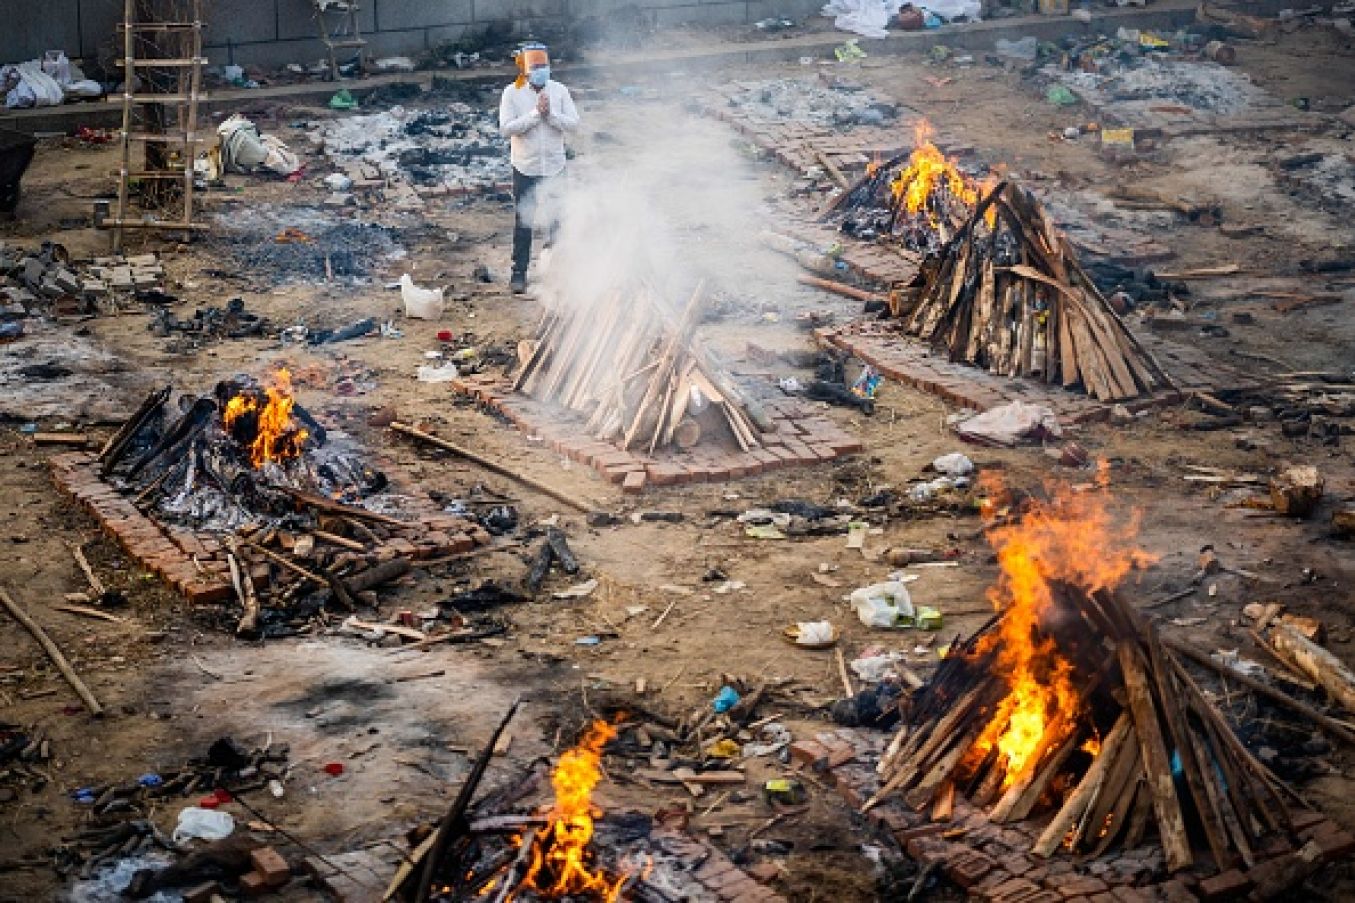 A Man Prays Next To A Burning Pyre Of A Victim Who Died Of The Covid-19 Coronavirus At A Cremation Ground In New Delhi. Photo: Jewel Samad/ Afp Via Getty Images